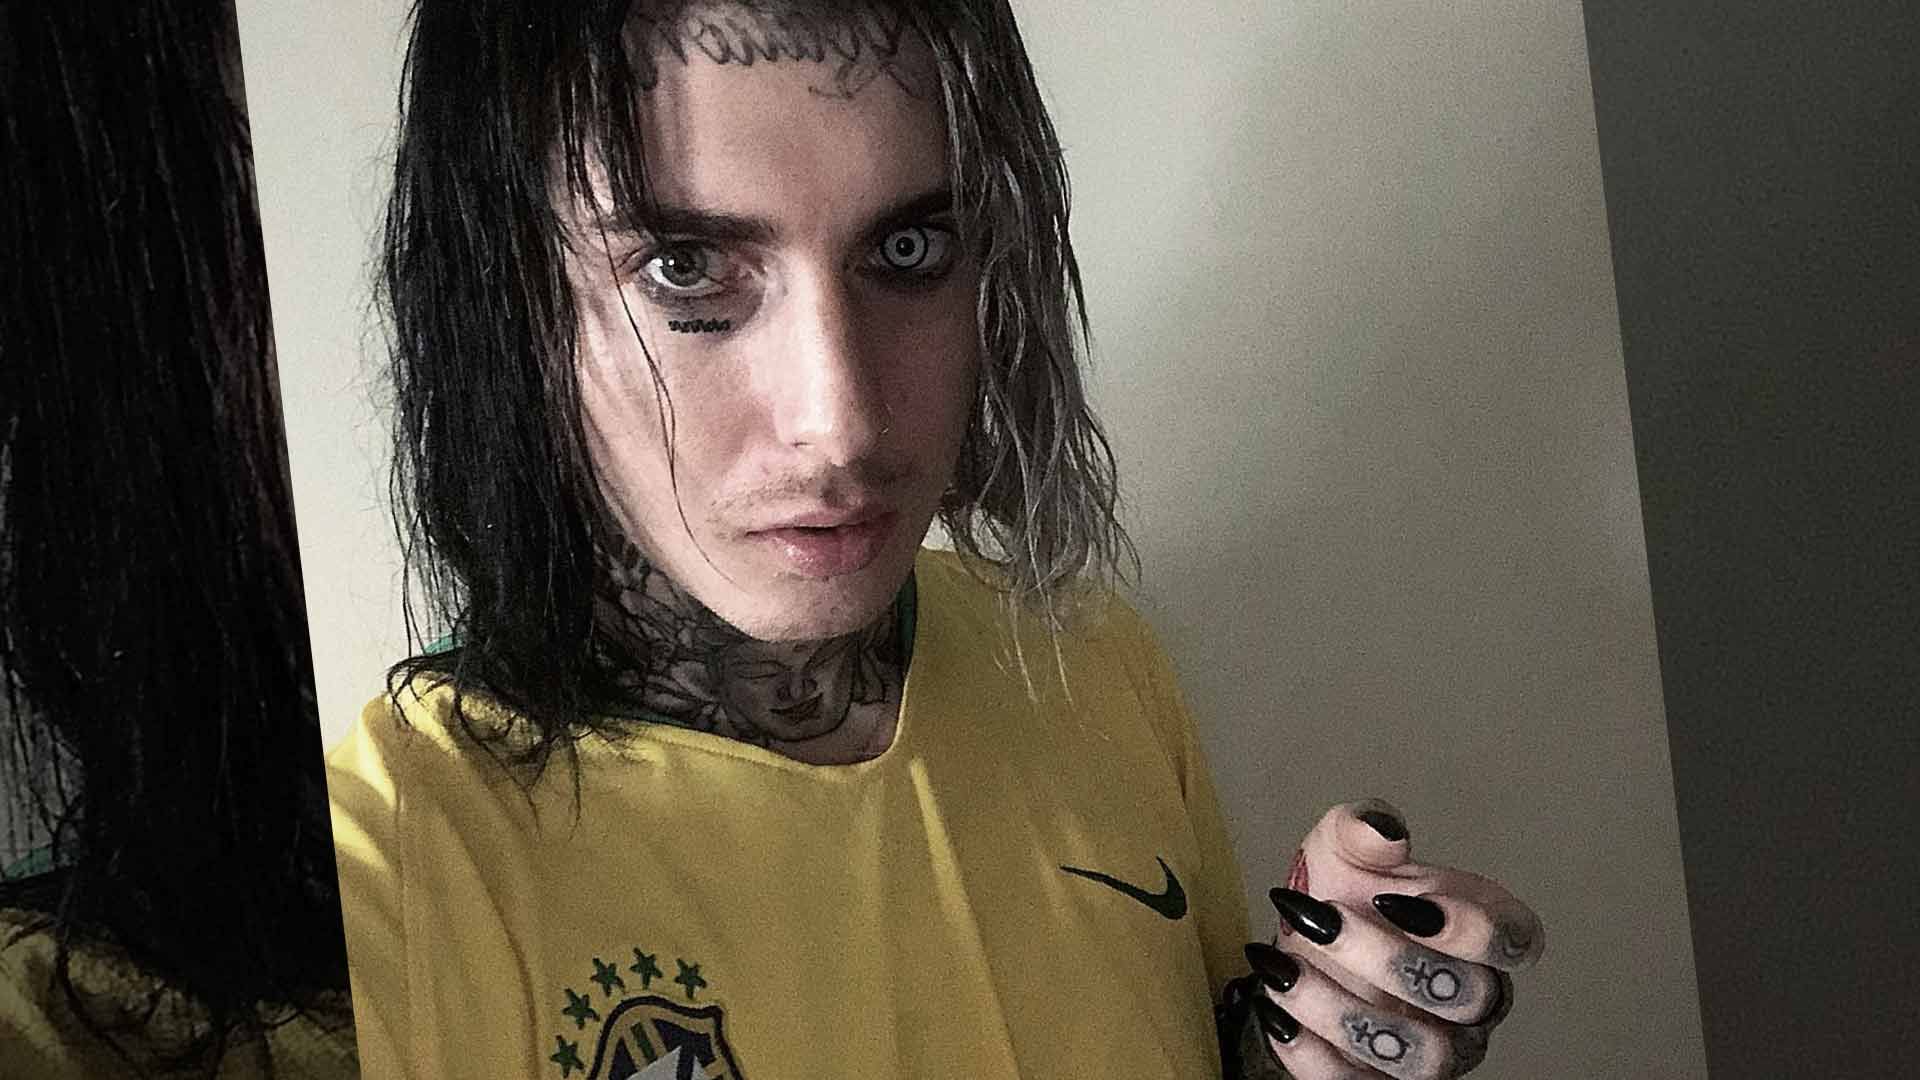 Industrial Hip Hop Star Ghostemane Files Restraining Order Against Ex Gf Fears For Safety